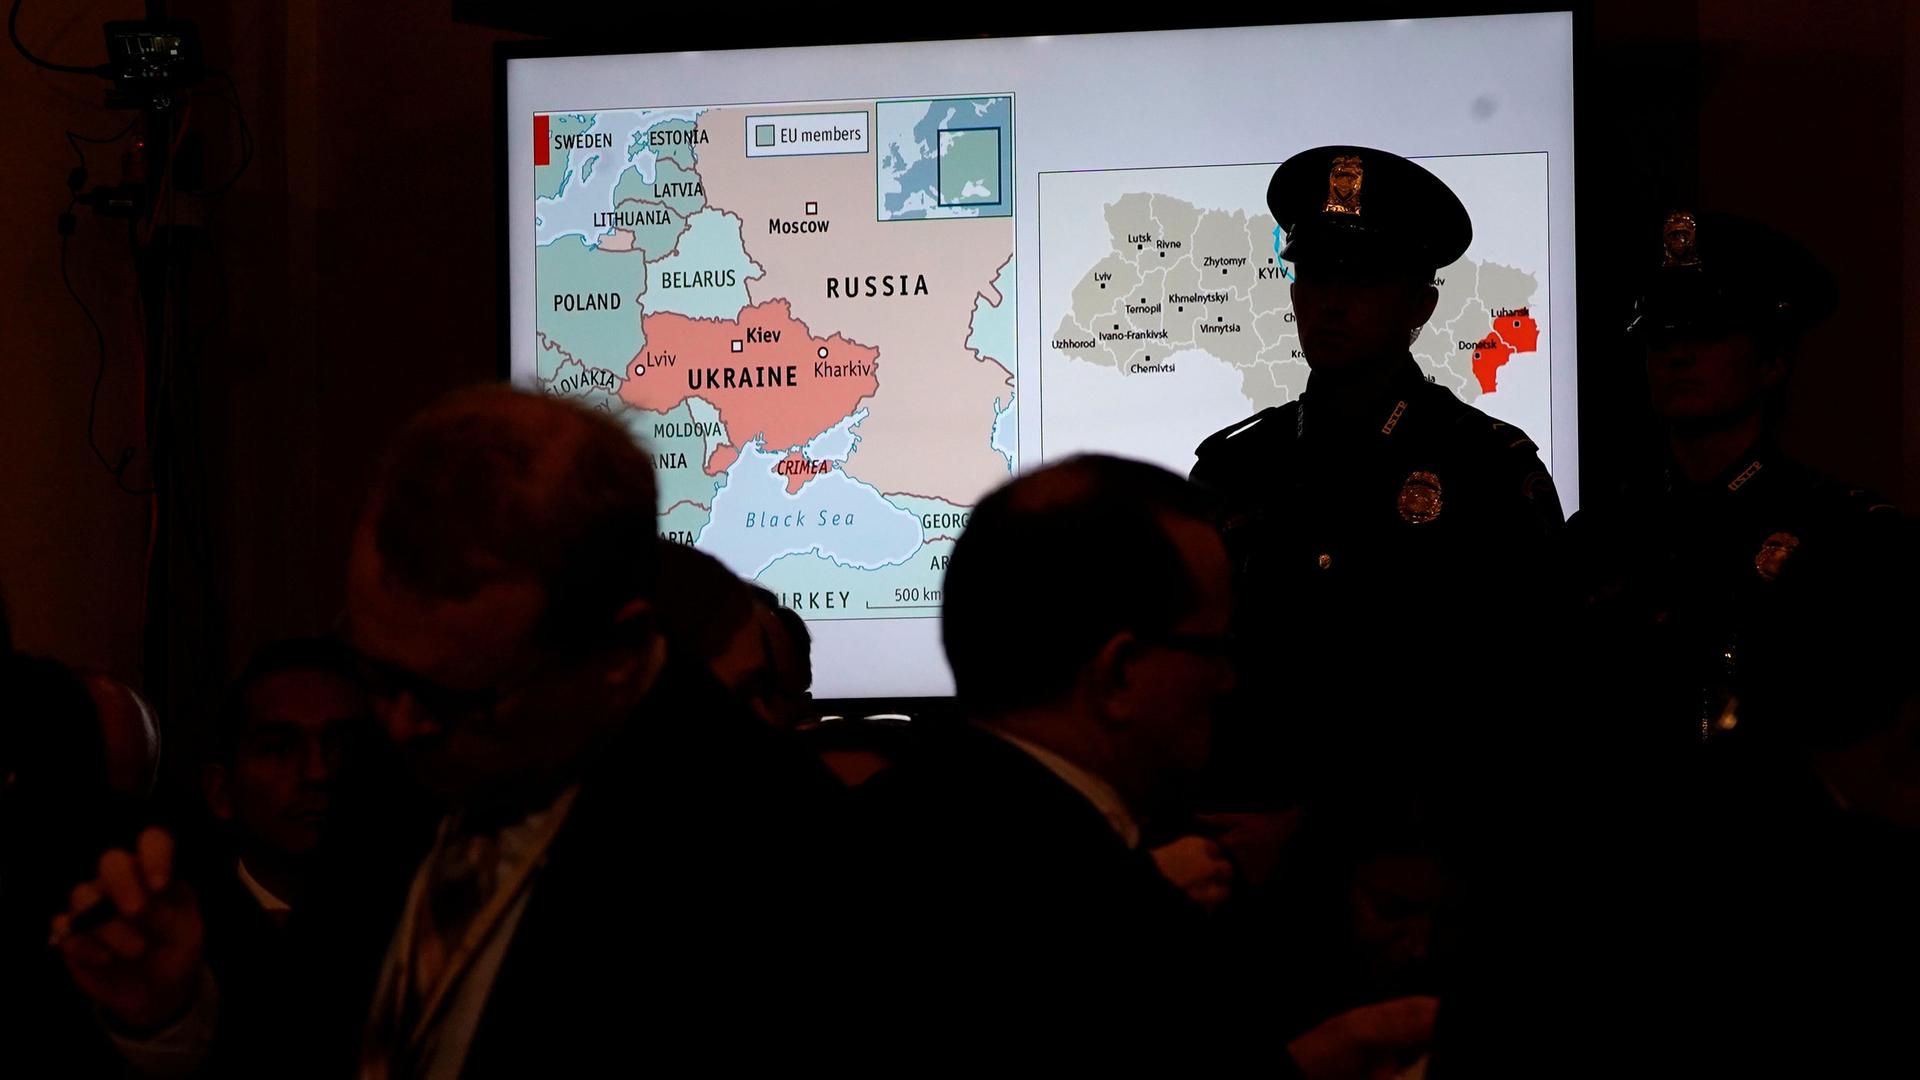 A map of Ukraine is projected onto a screen; a man in a uniform wearing a hat is silhouetted against it.